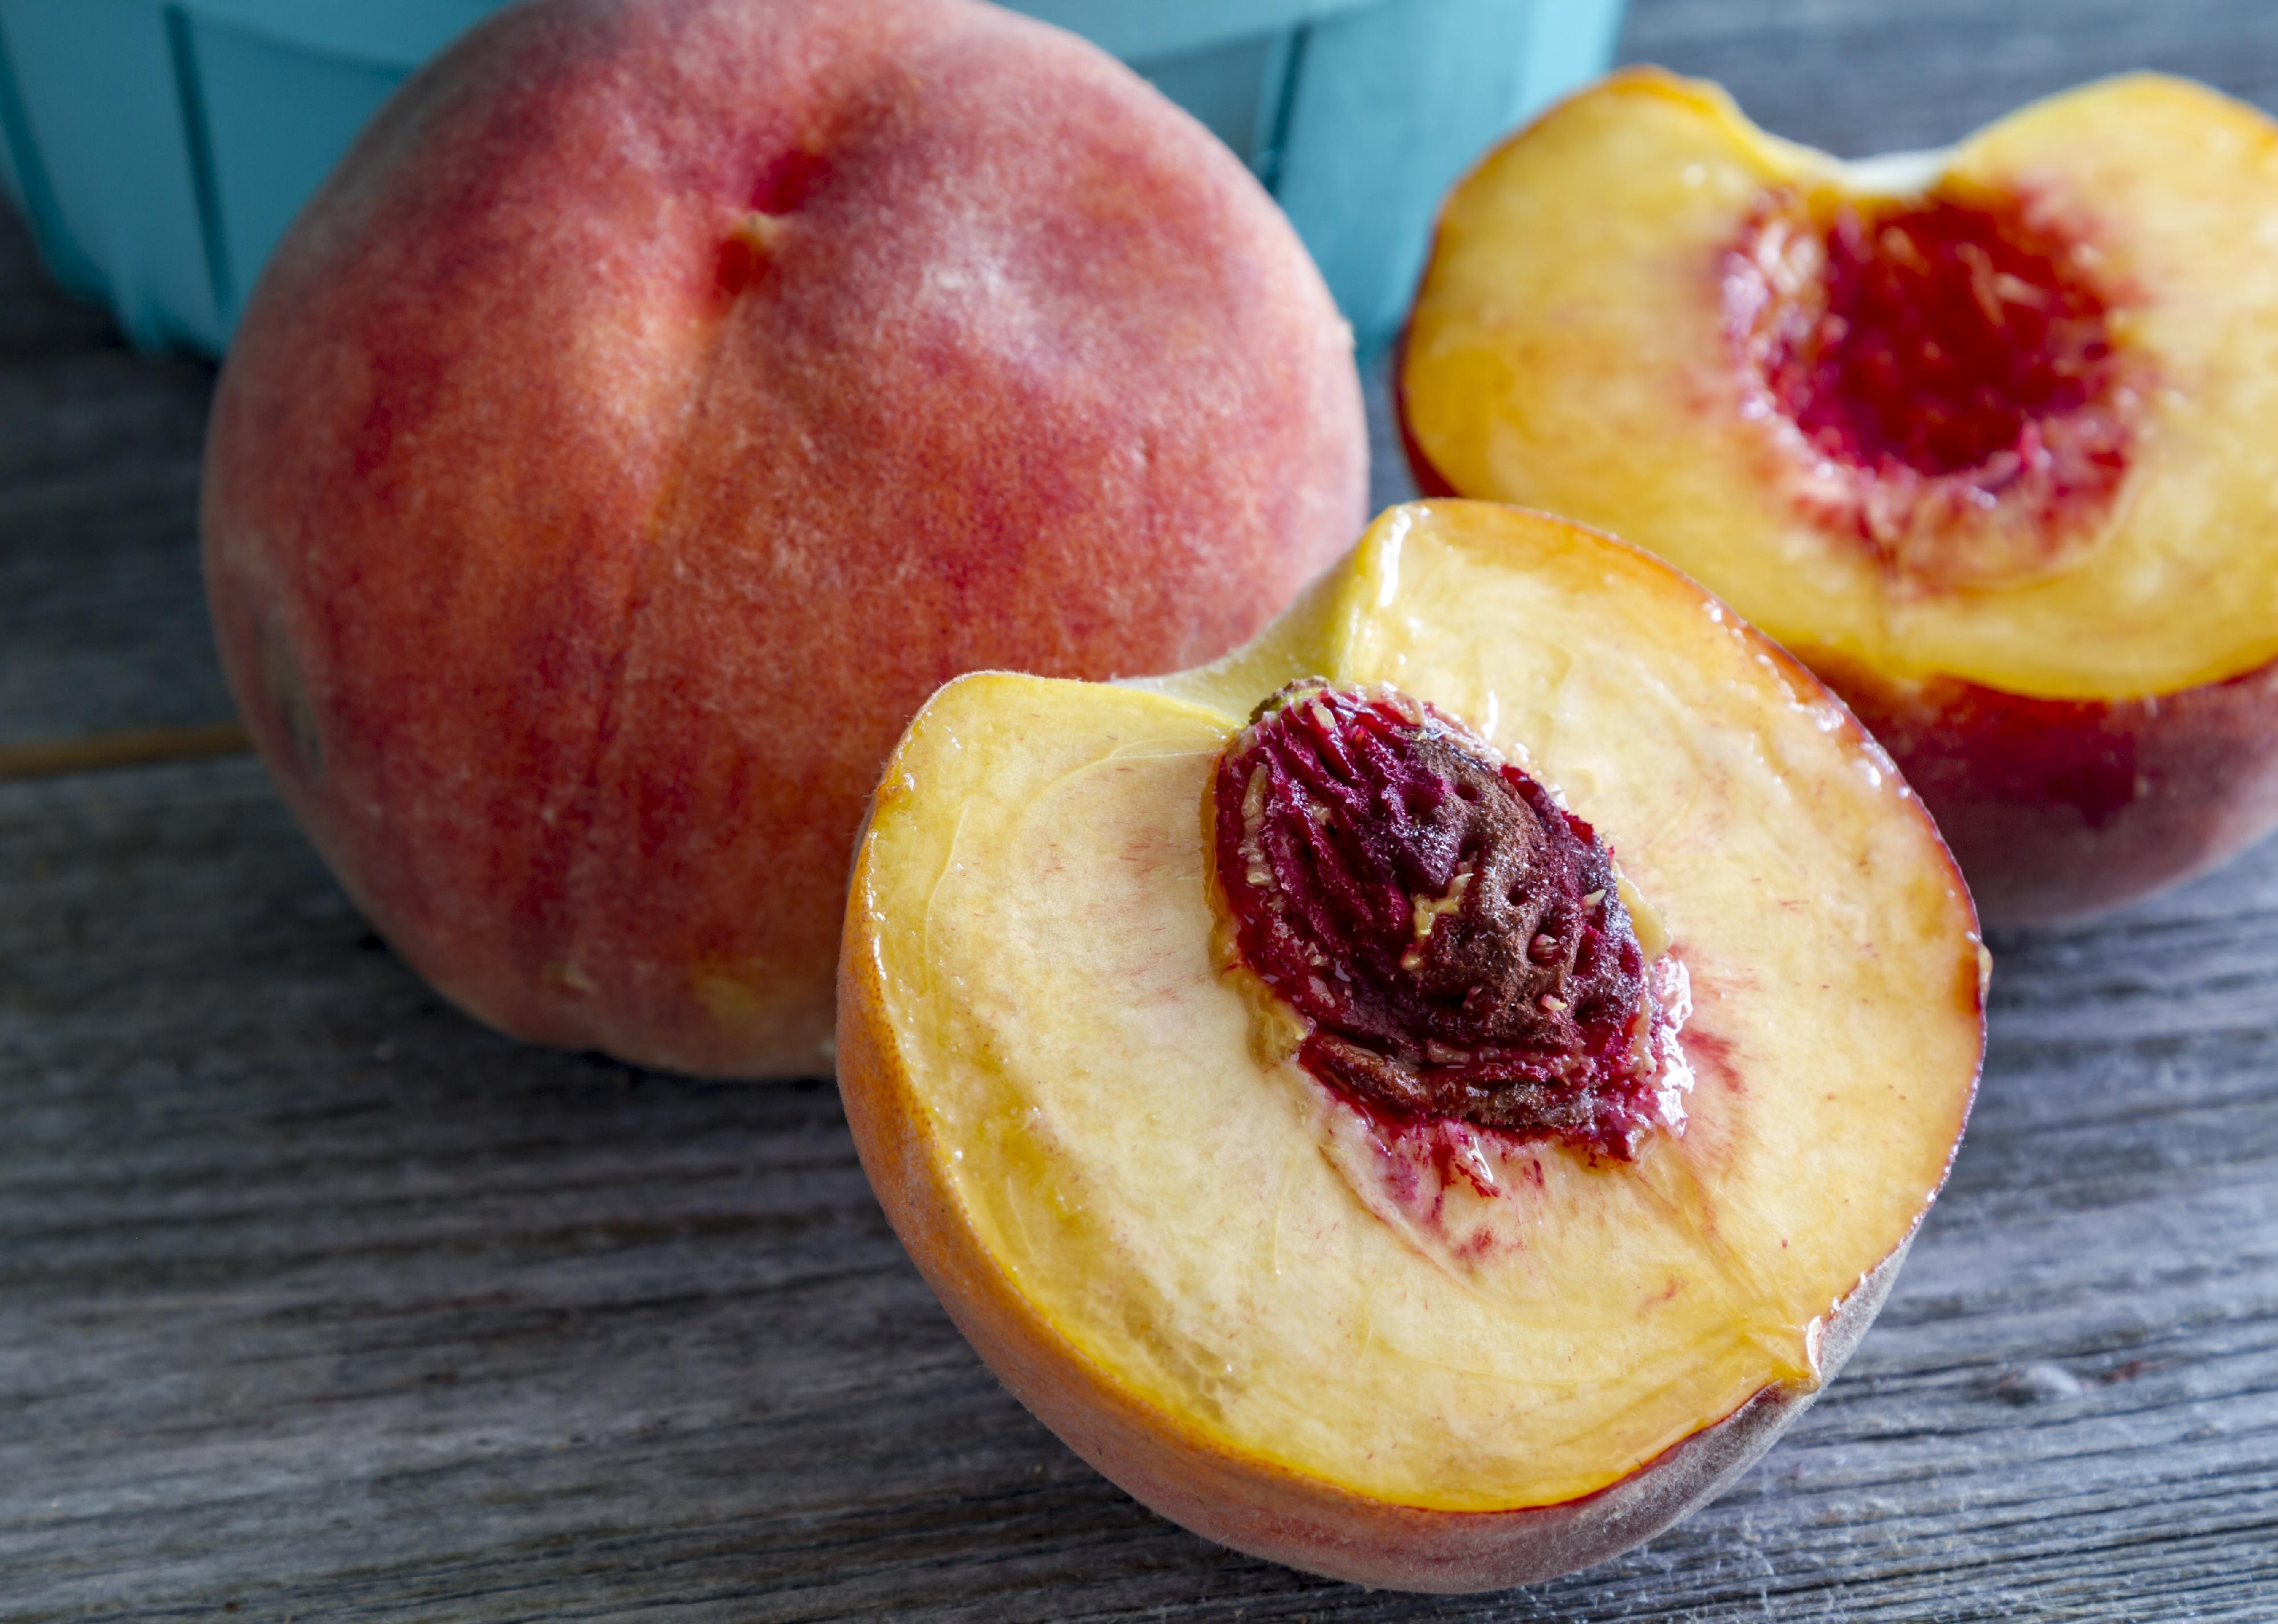 <p>What's in a peach? If you live in central or southern Atlanta, or any of the Gulf states, you'll find a "<a href="https://dare.news.wisc.edu/same-thing-different-words-synonyms-by-region/index.html">kernel</a>" buried in the center of a peach. But those who eat their peaches in the Pacific Northwest or in northern states, get rid of their "pits." While those across the country refer to the seeds as "stones," the term is most commonly used in the Midwest states. Regardless of the term you use, it's good to know that you can <a href="https://www.phillyorchards.org/2015/07/07/growing-peaches-from-seed/">grow your own peach tree</a> right from your favorite kitchen.</p>